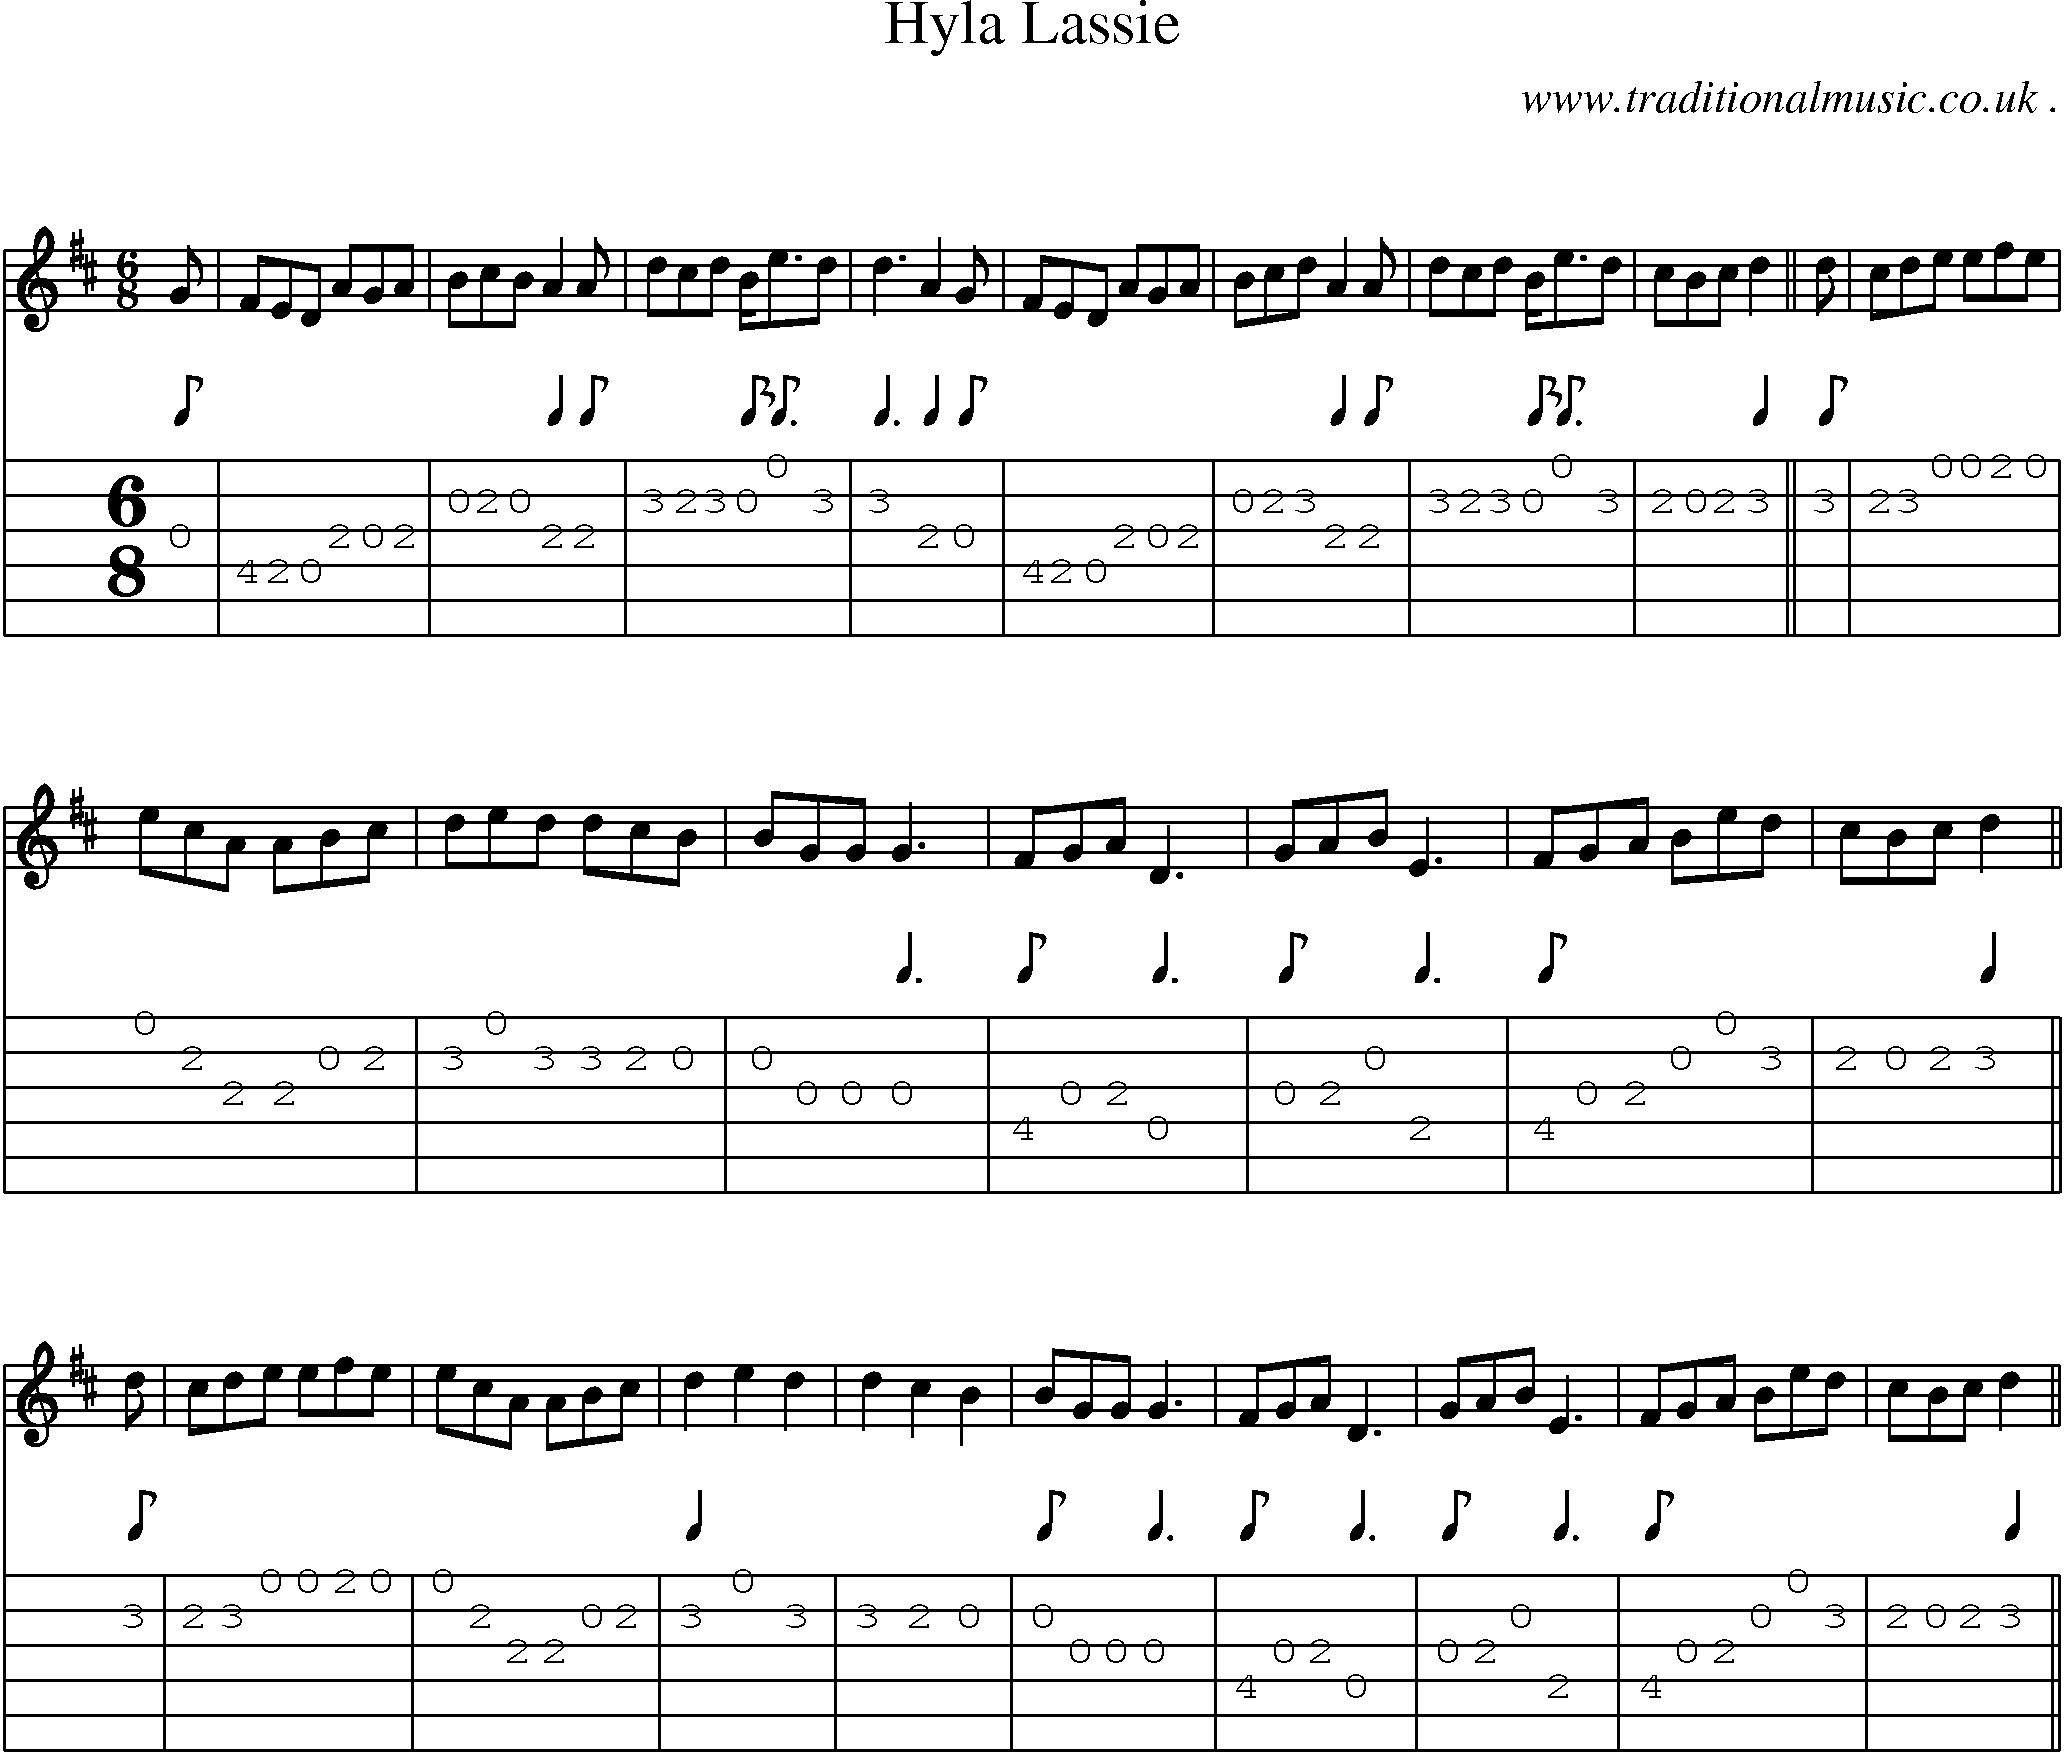 Sheet-Music and Guitar Tabs for Hyla Lassie